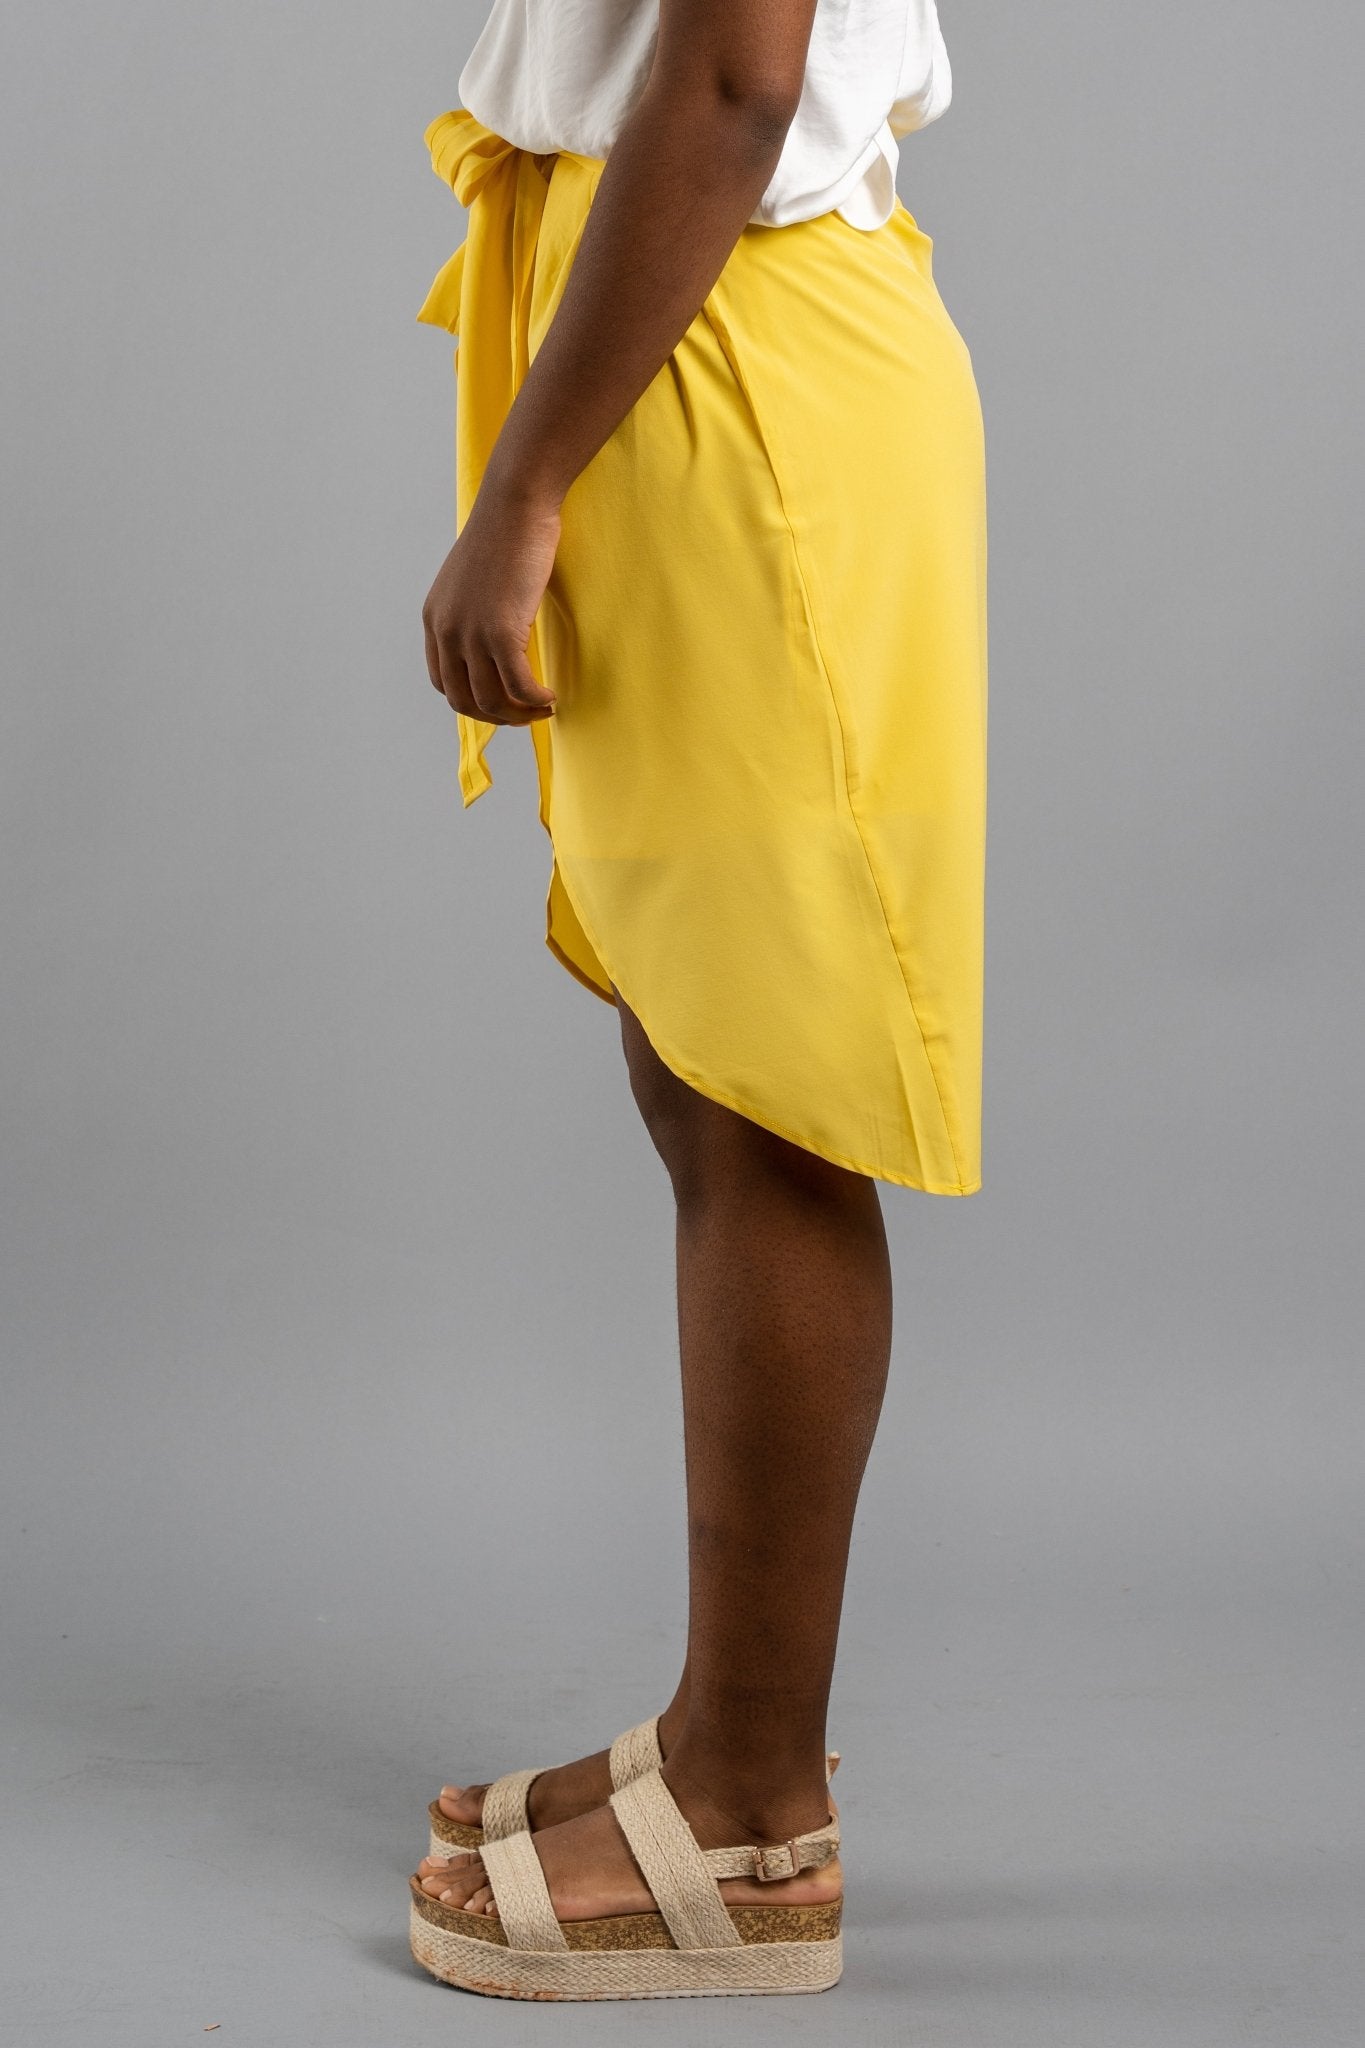 Front wrap midi skirt yellow fawn - Stylish Skirts - Trendy Staycation Outfits at Lush Fashion Lounge Boutique in Oklahoma City